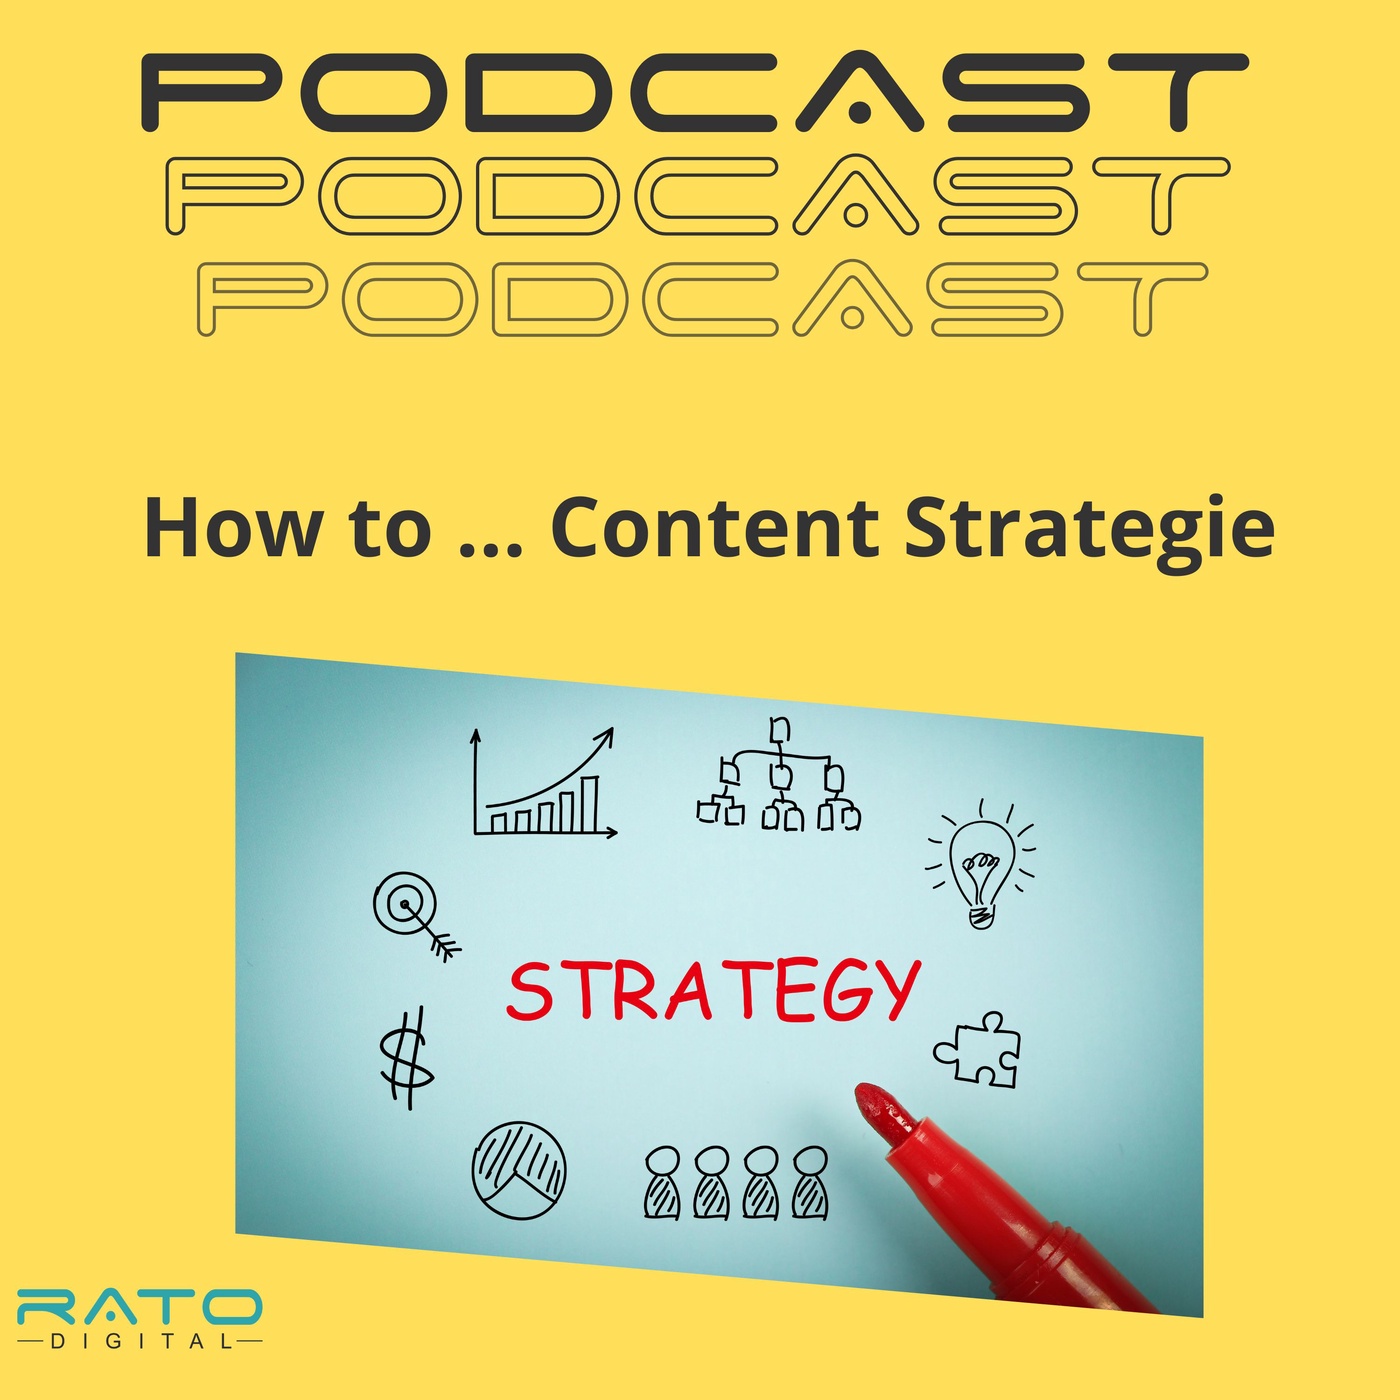 How to ... Content Strategie